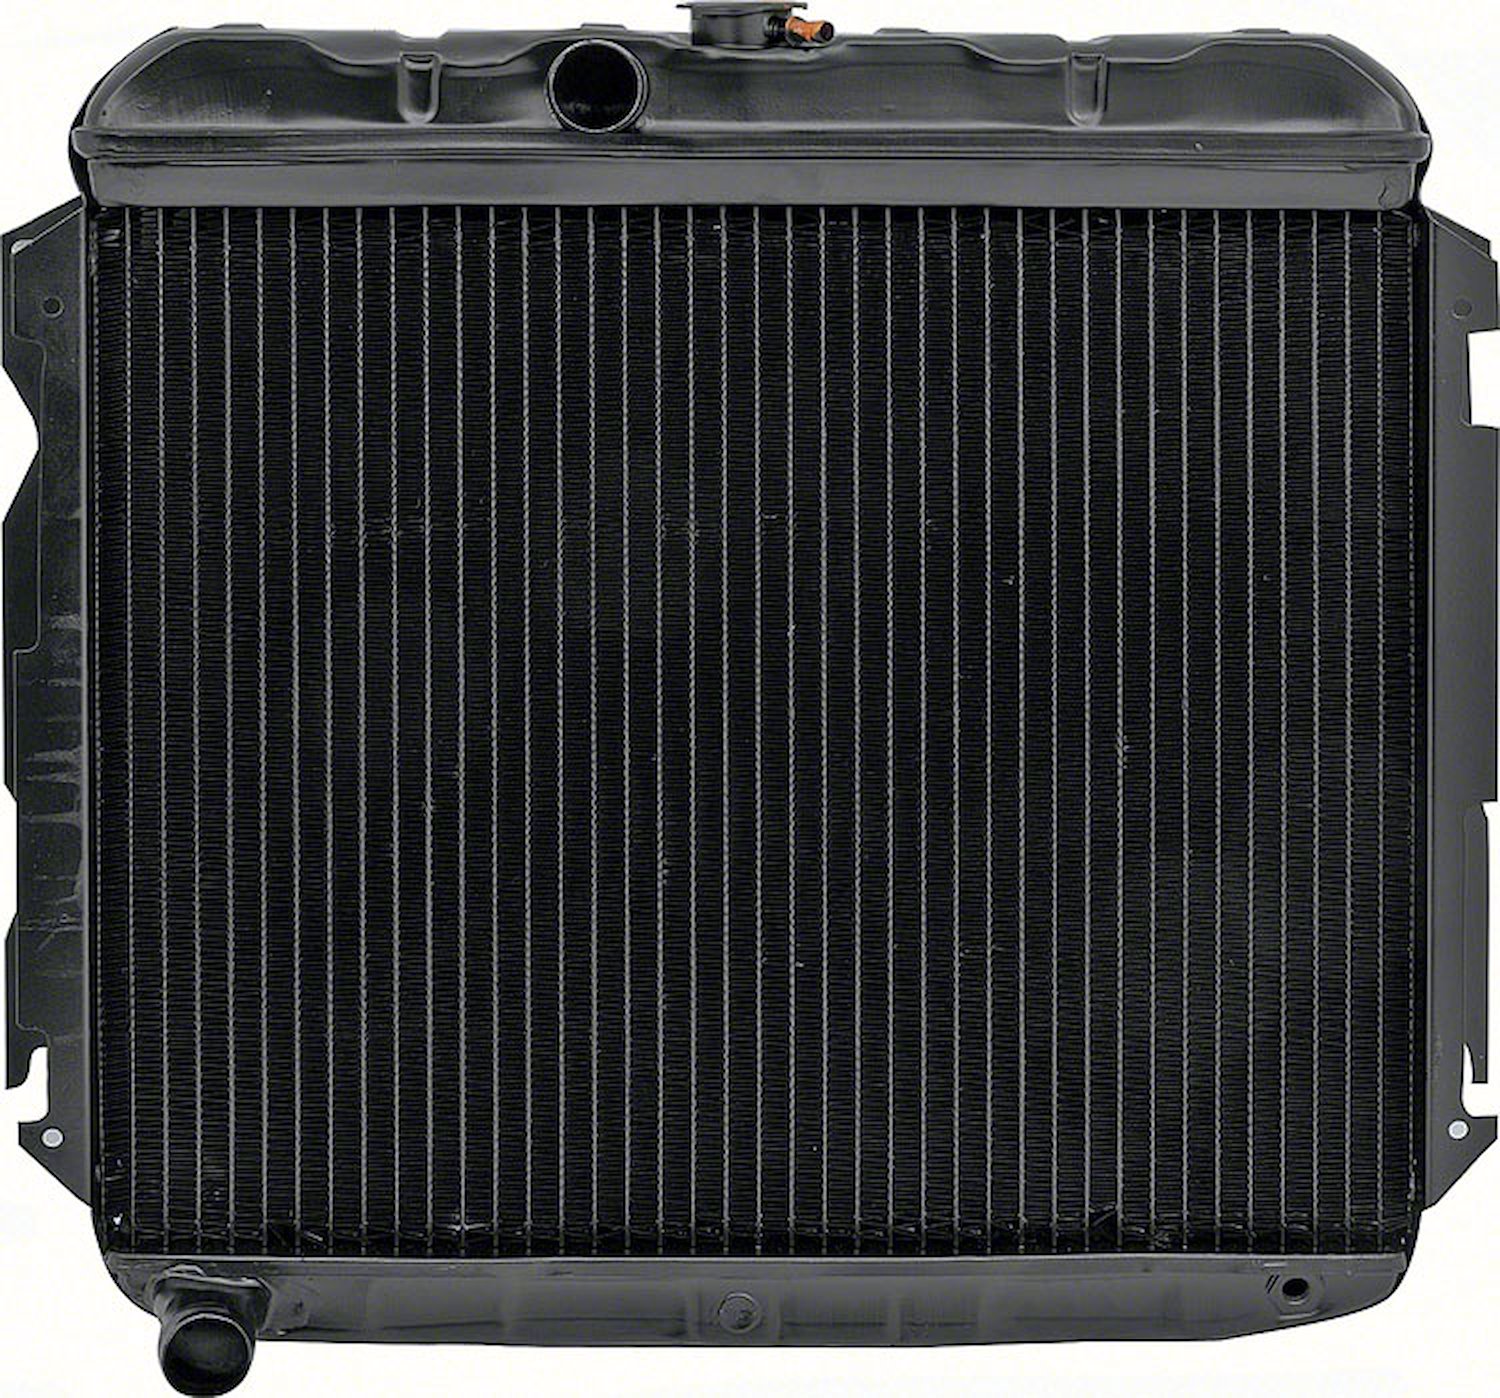 MB2368S Replacement Radiator 1966-69 Mopar B-Body V8 318Ci/340Ci With Standard Trans 3 Row 26" Wide